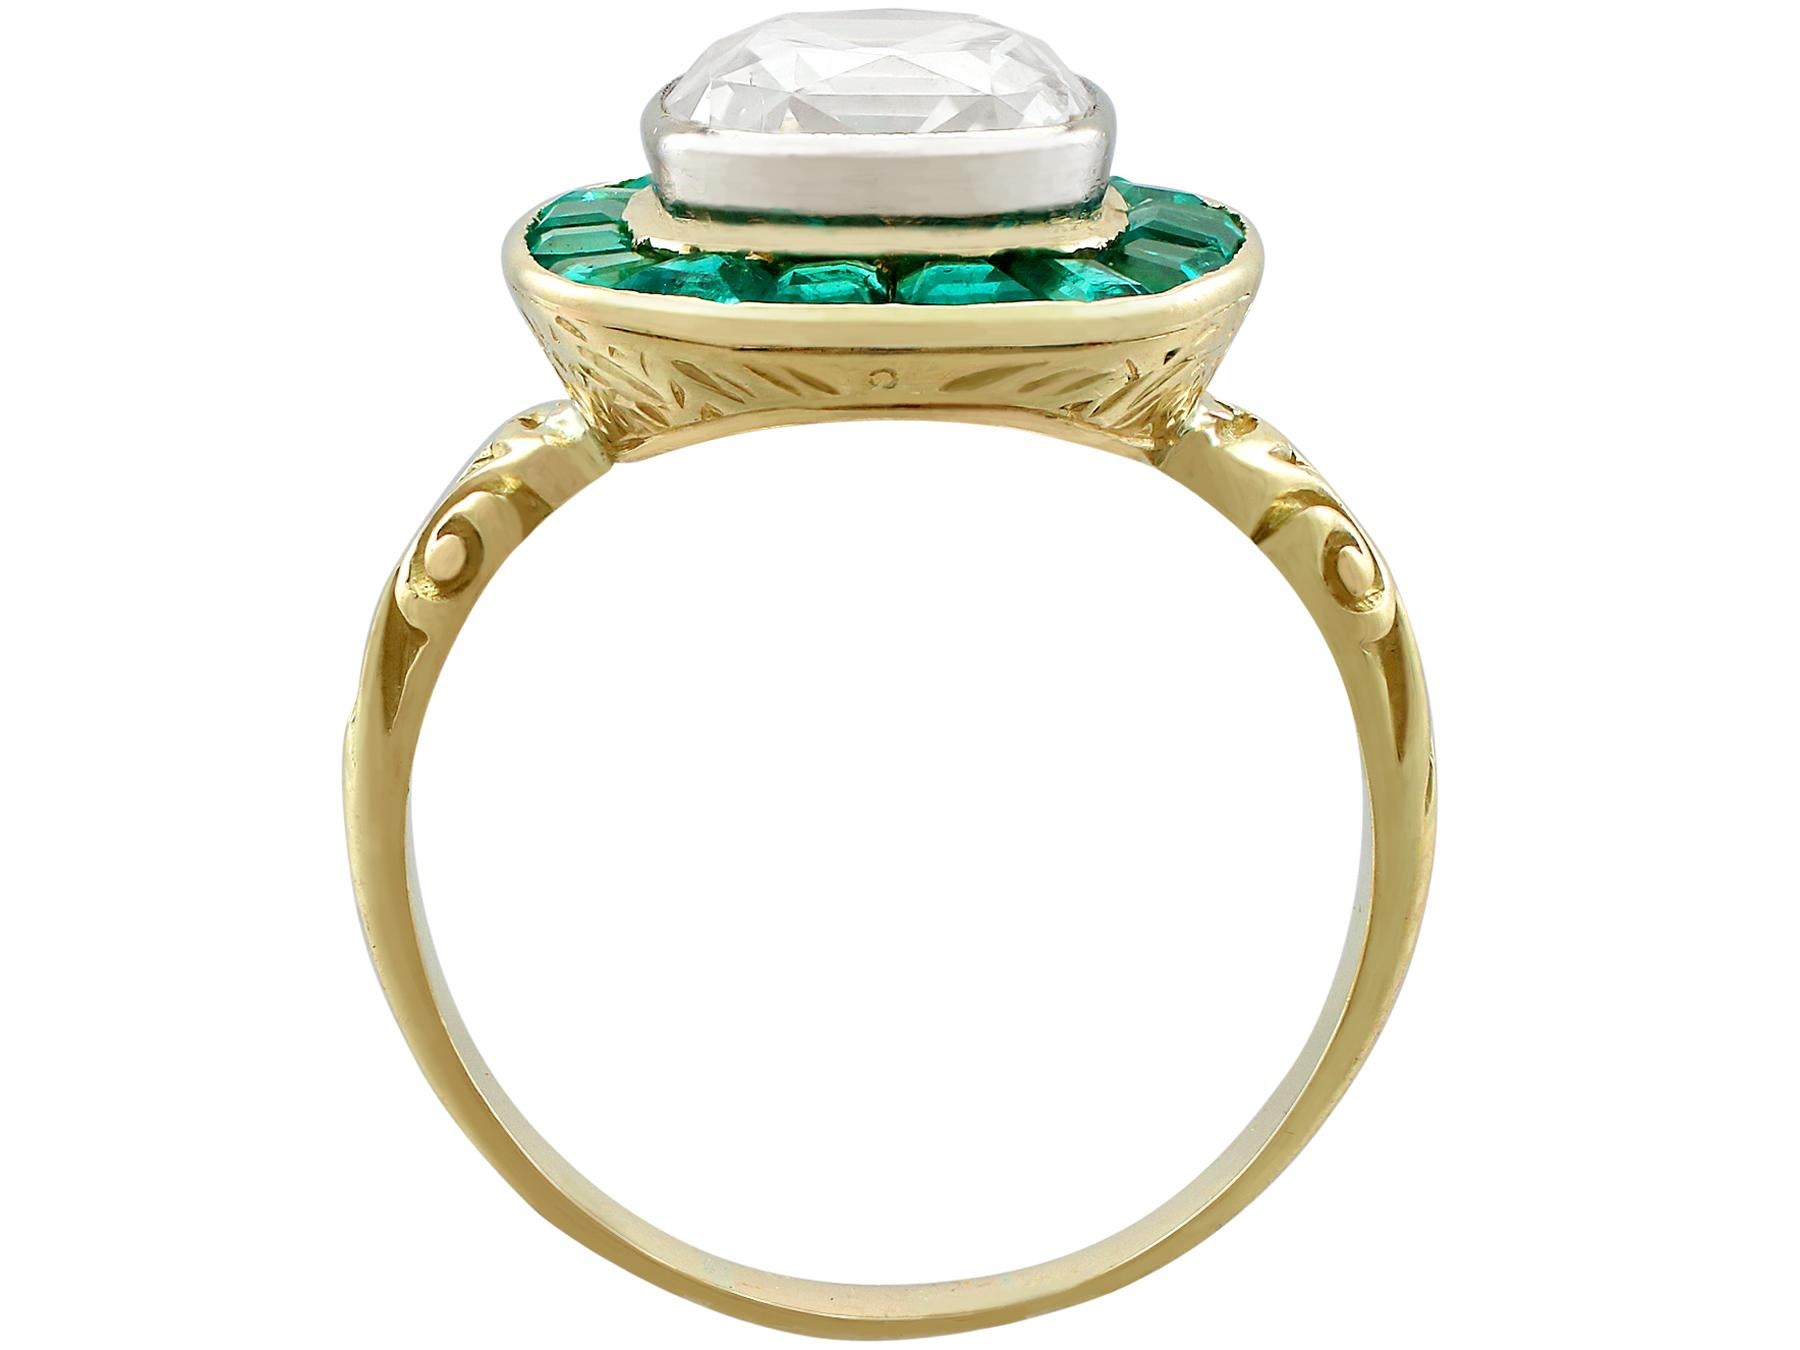 Cushion Cut Antique Victorian 3.25 Carat Emerald and 1.92 Carat Diamond Yellow Gold Ring For Sale